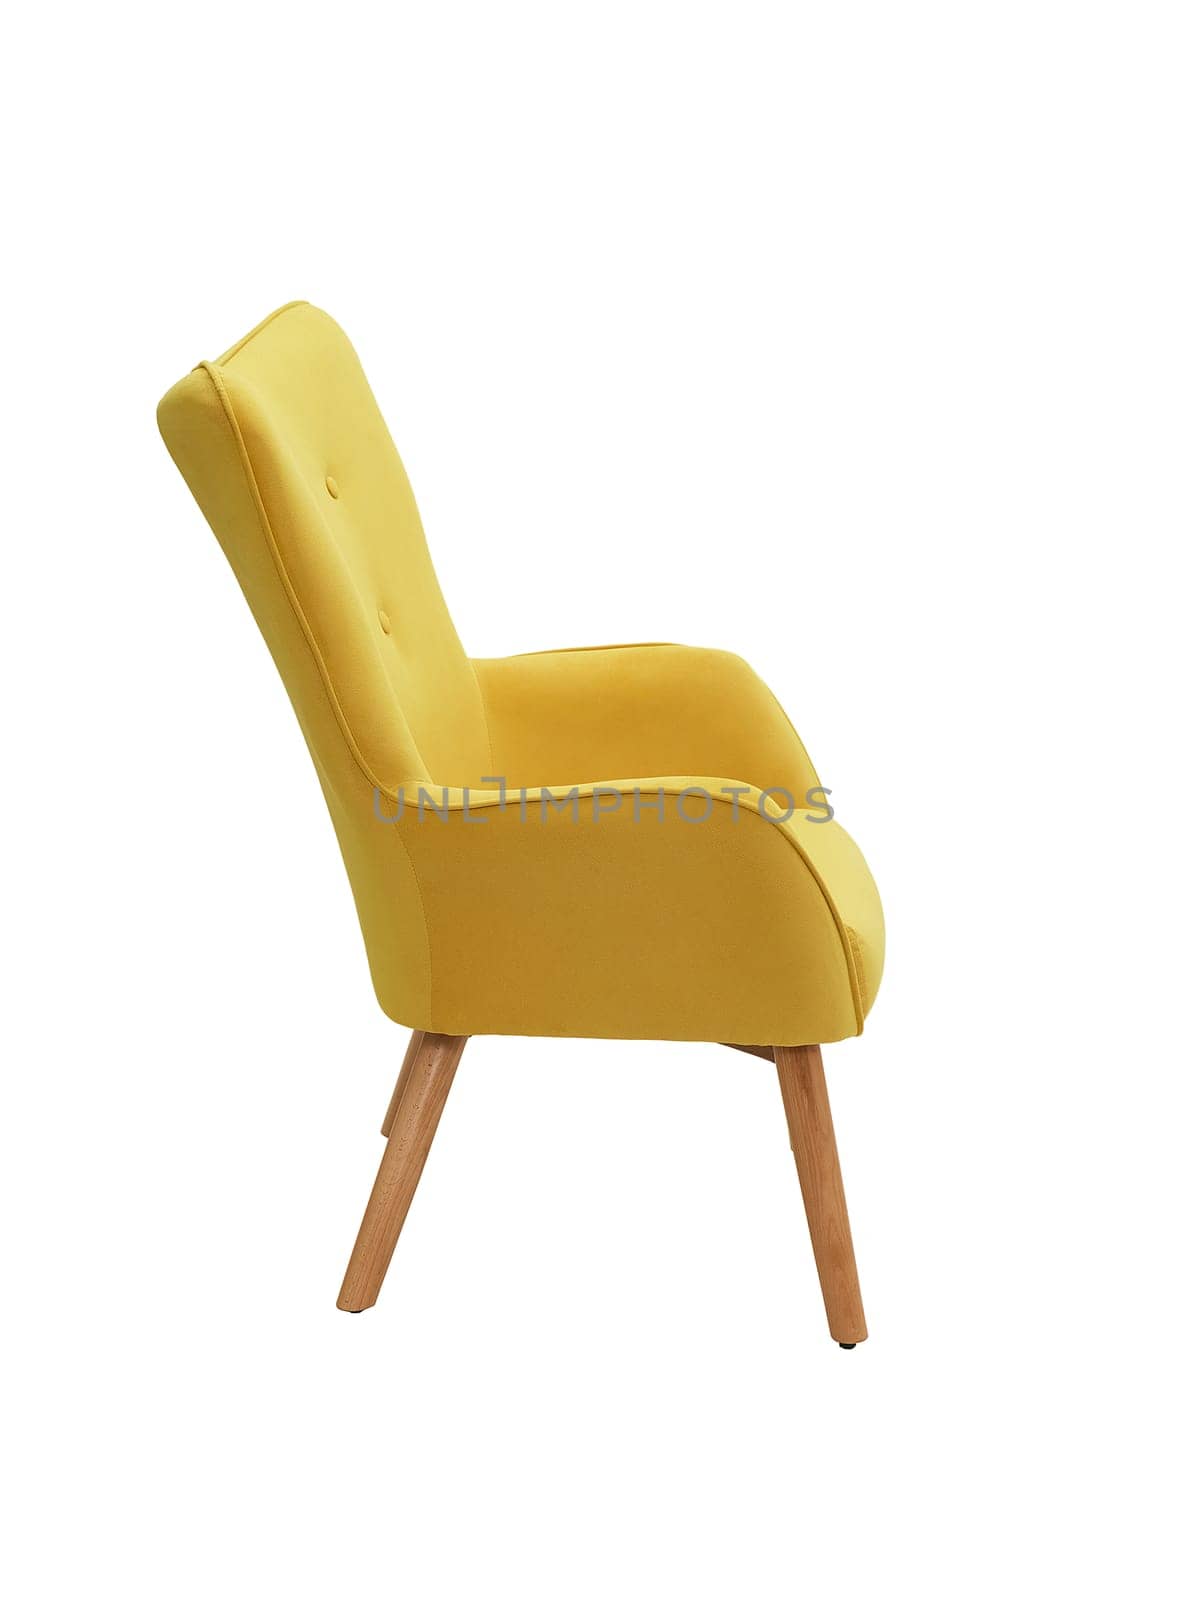 modern furniture, interior, home design in minimal style. yellow fabric armchair by artemzatsepilin